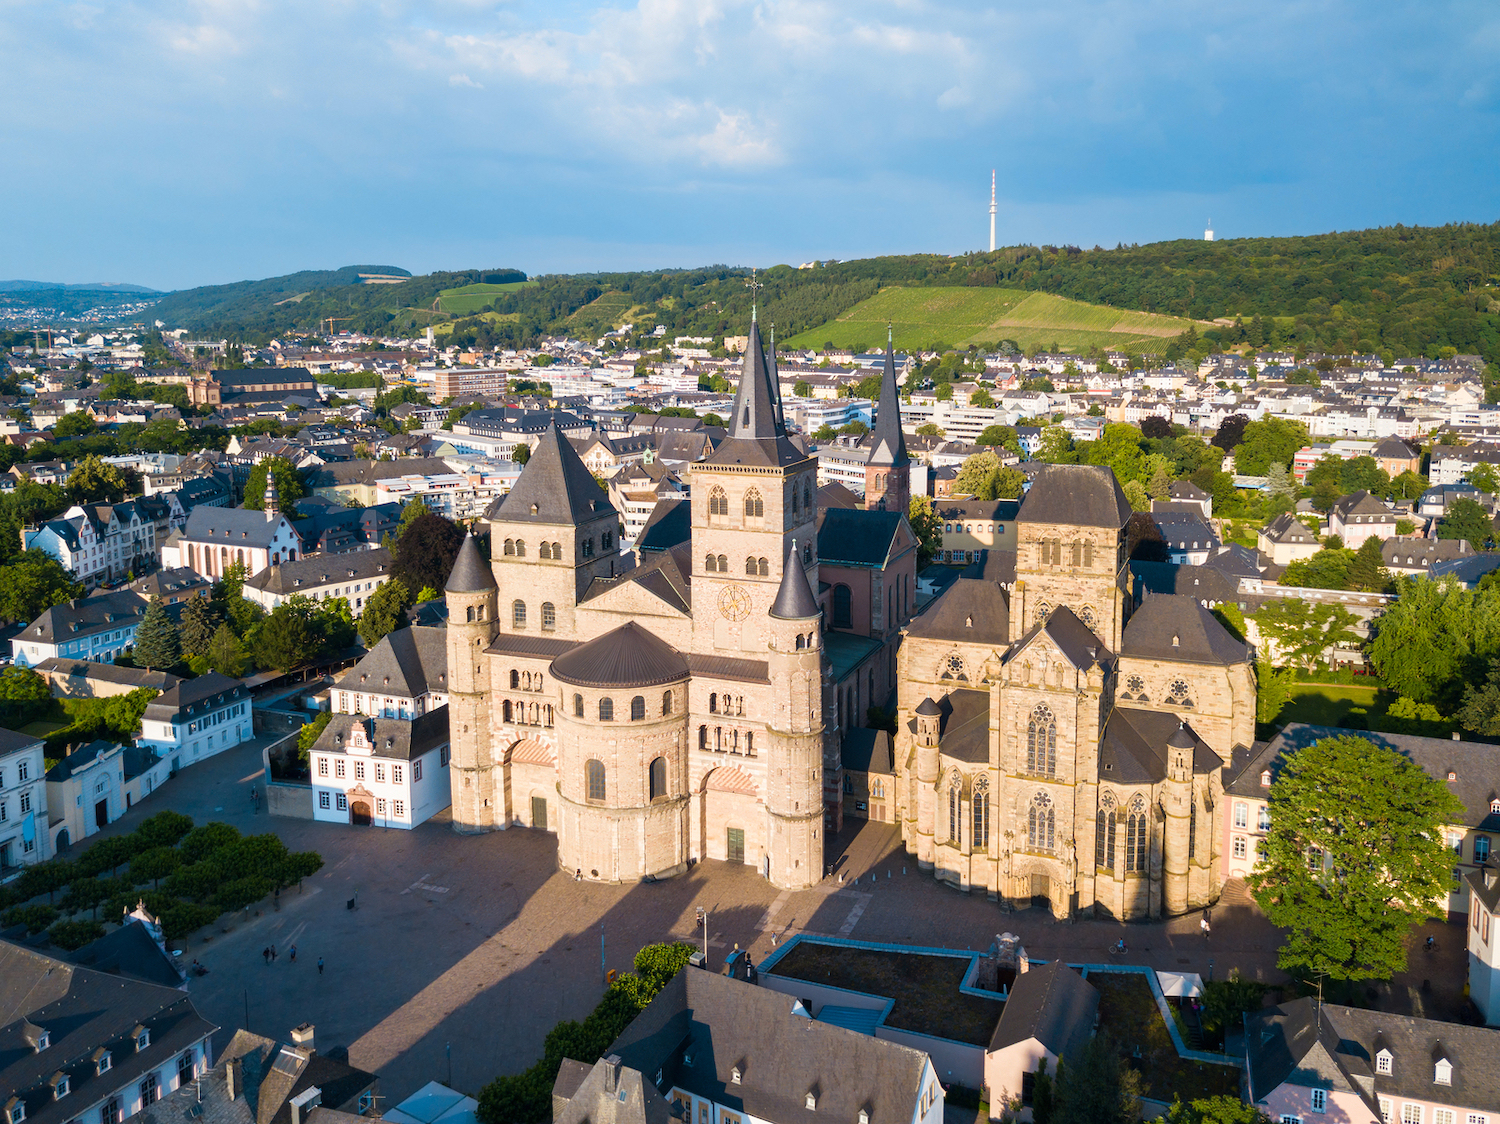 Church of Our Lady in Trier city in Germany